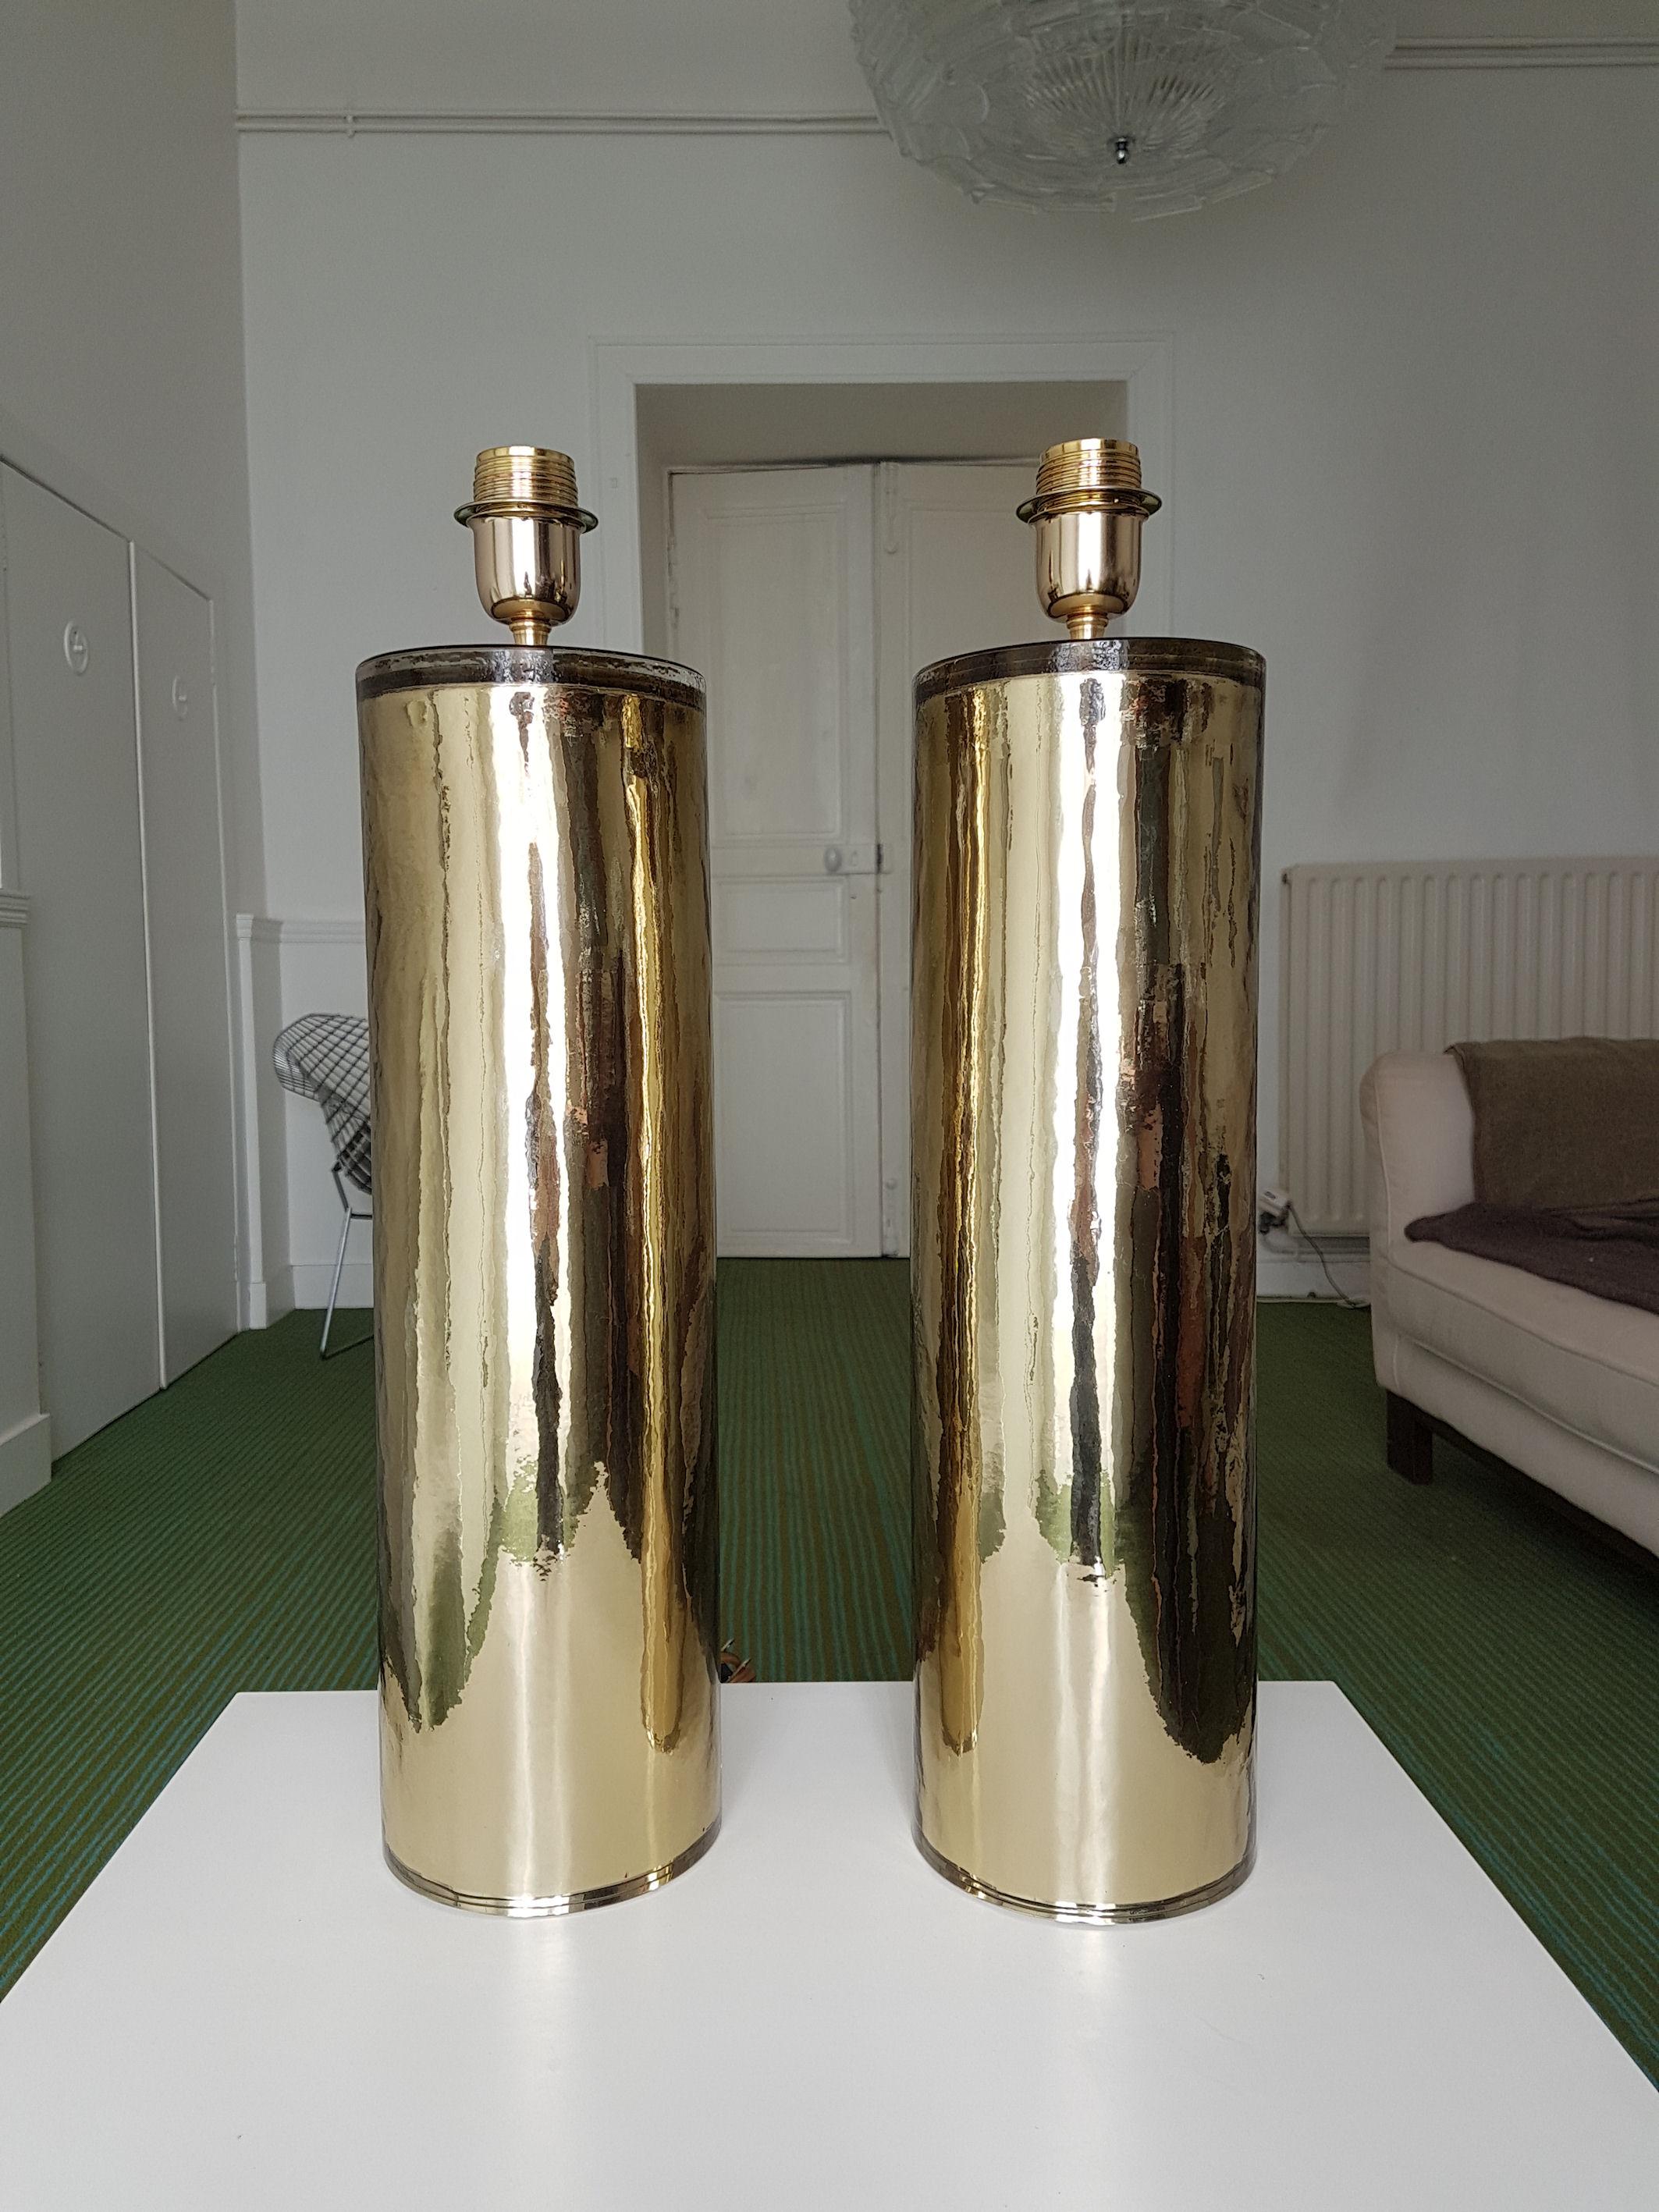 Pair of cylinder shape, mirrored gold Murano glass lamps.
With a beautiful quality, thickness of the glass.
Italy, 1970s. In the style of Venini.
They have been rewired.
Shades available on order only: black fabric outside, gold inside, D 15.75 in x